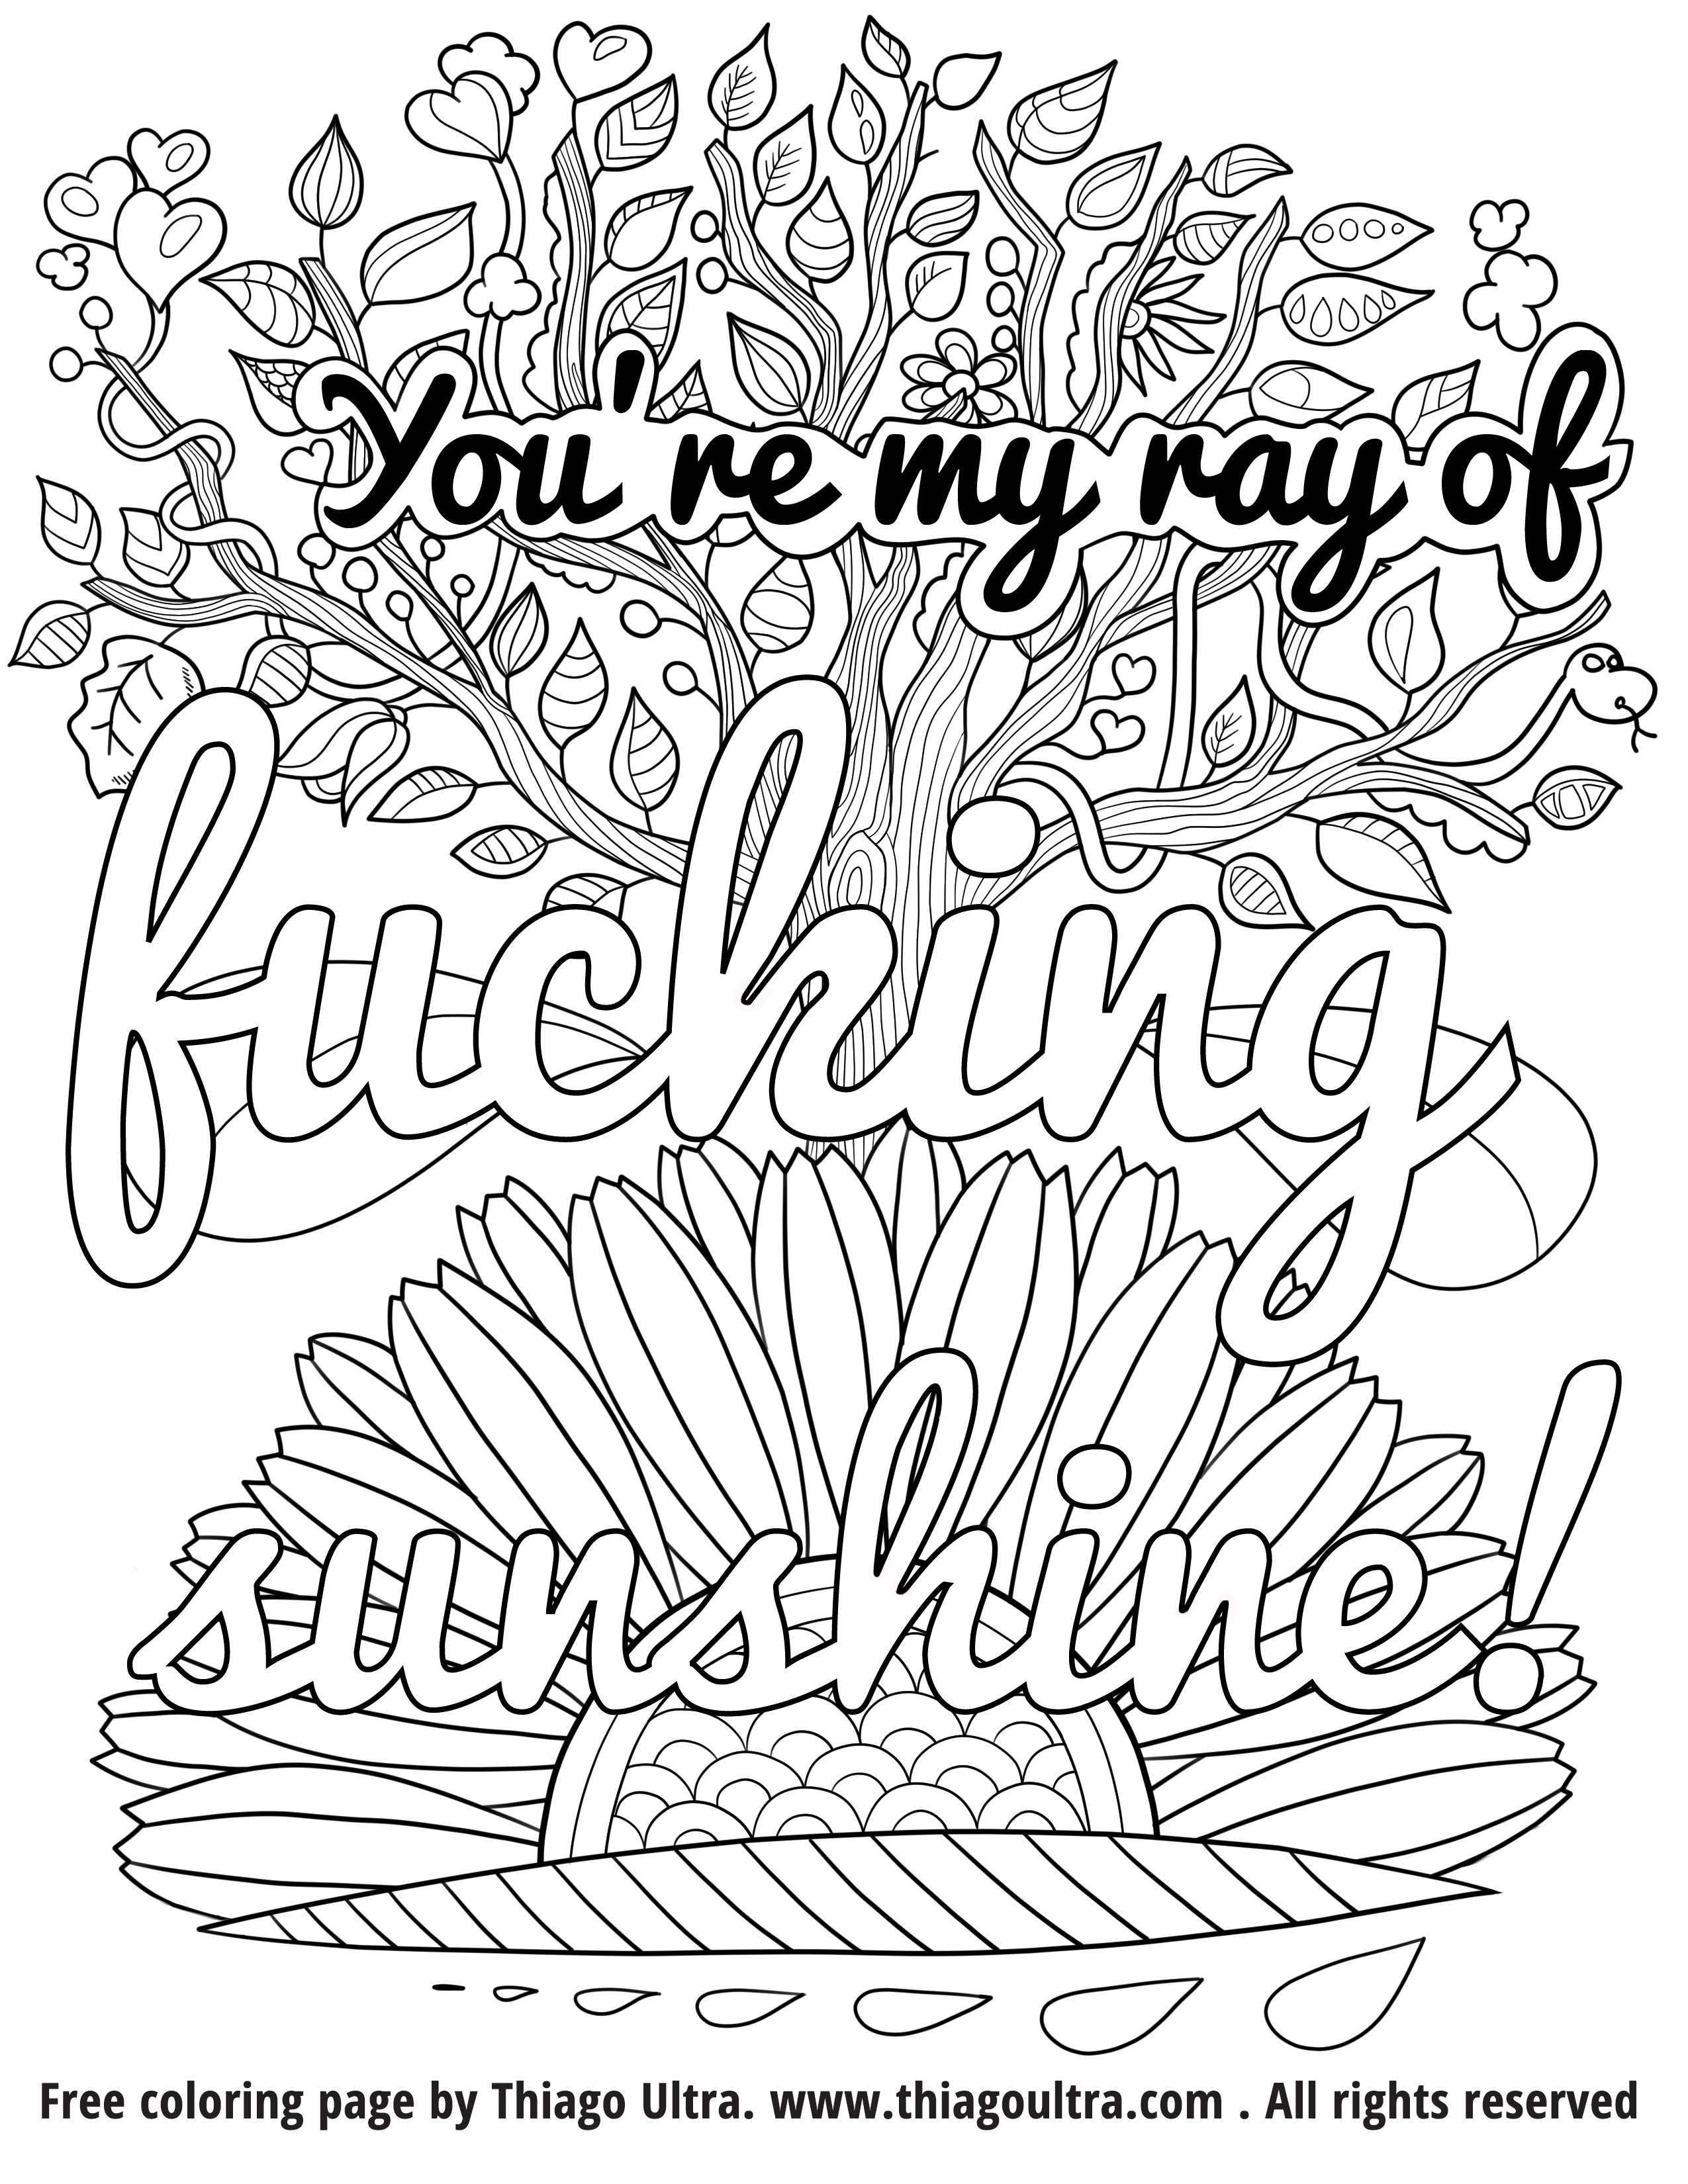 Free Printable Coloring Pages For Adults Swear Words ...